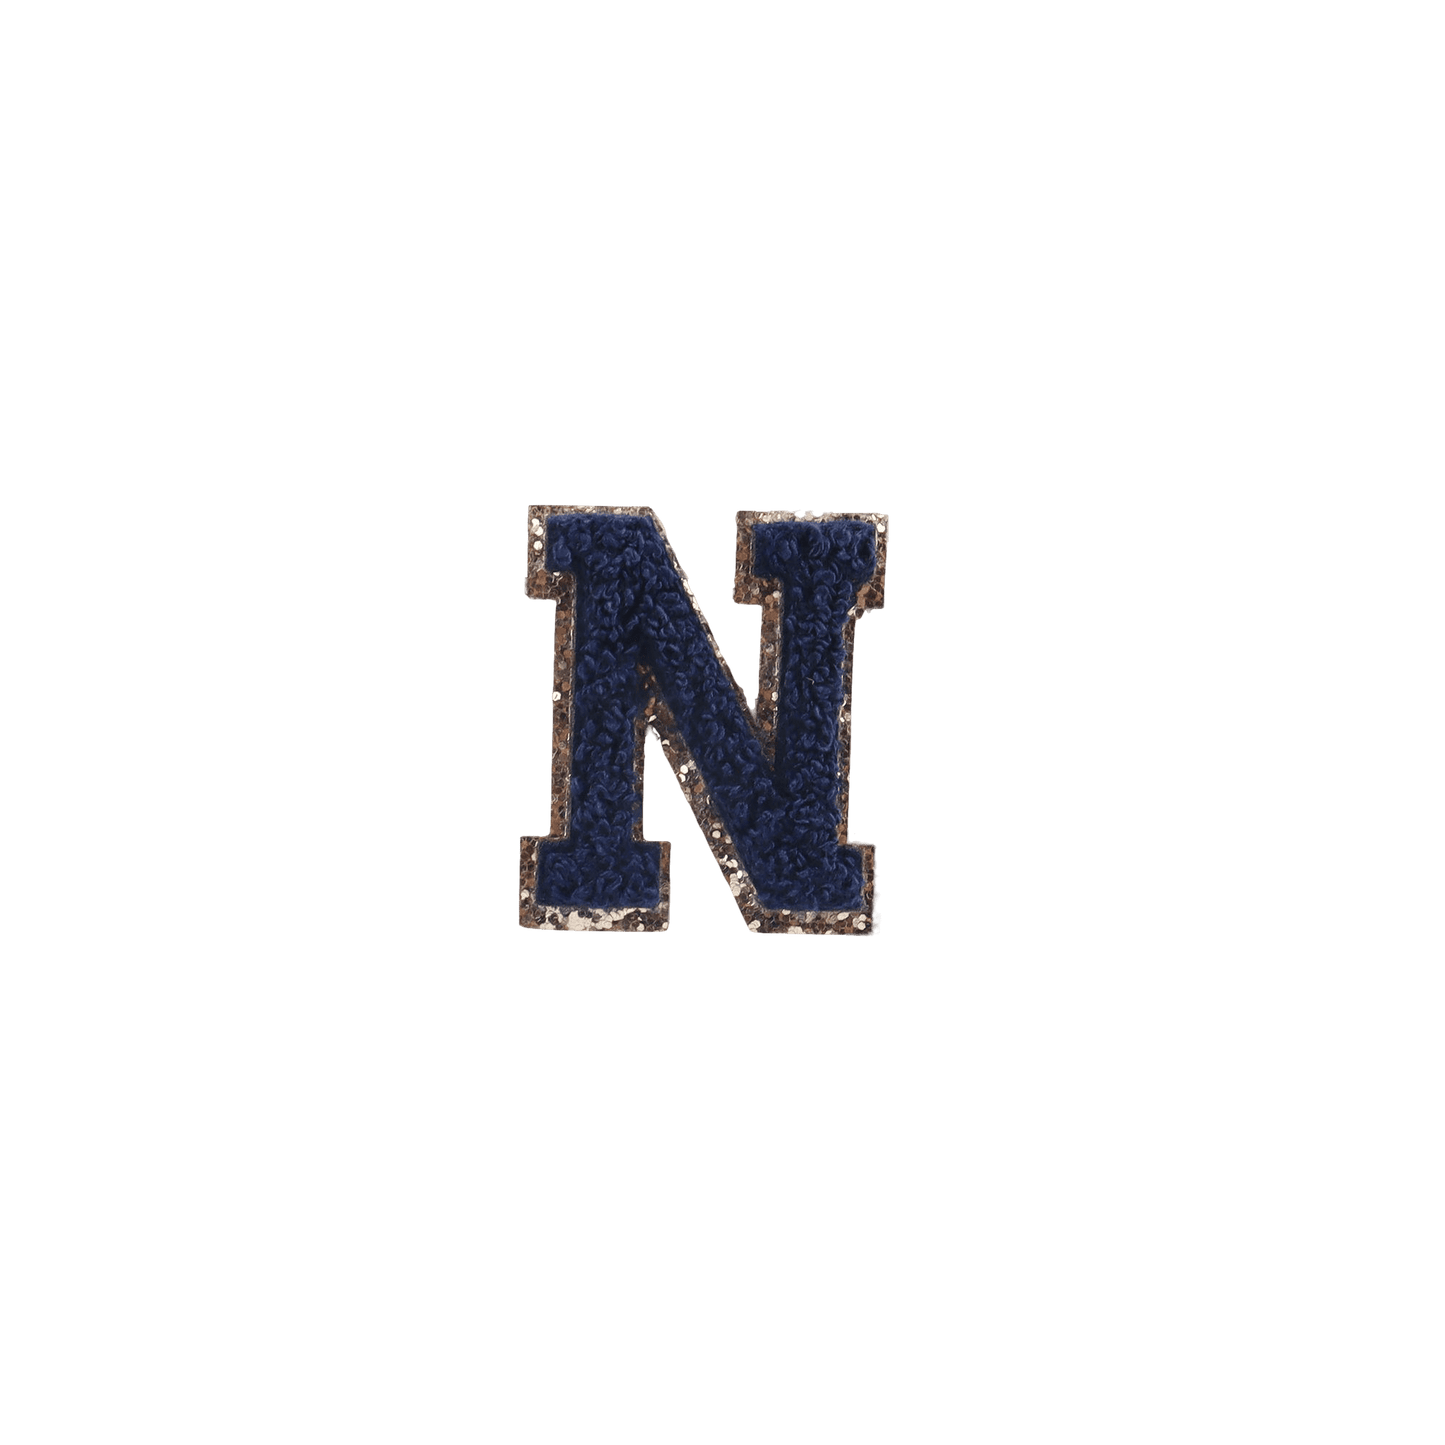 N Letter Patches